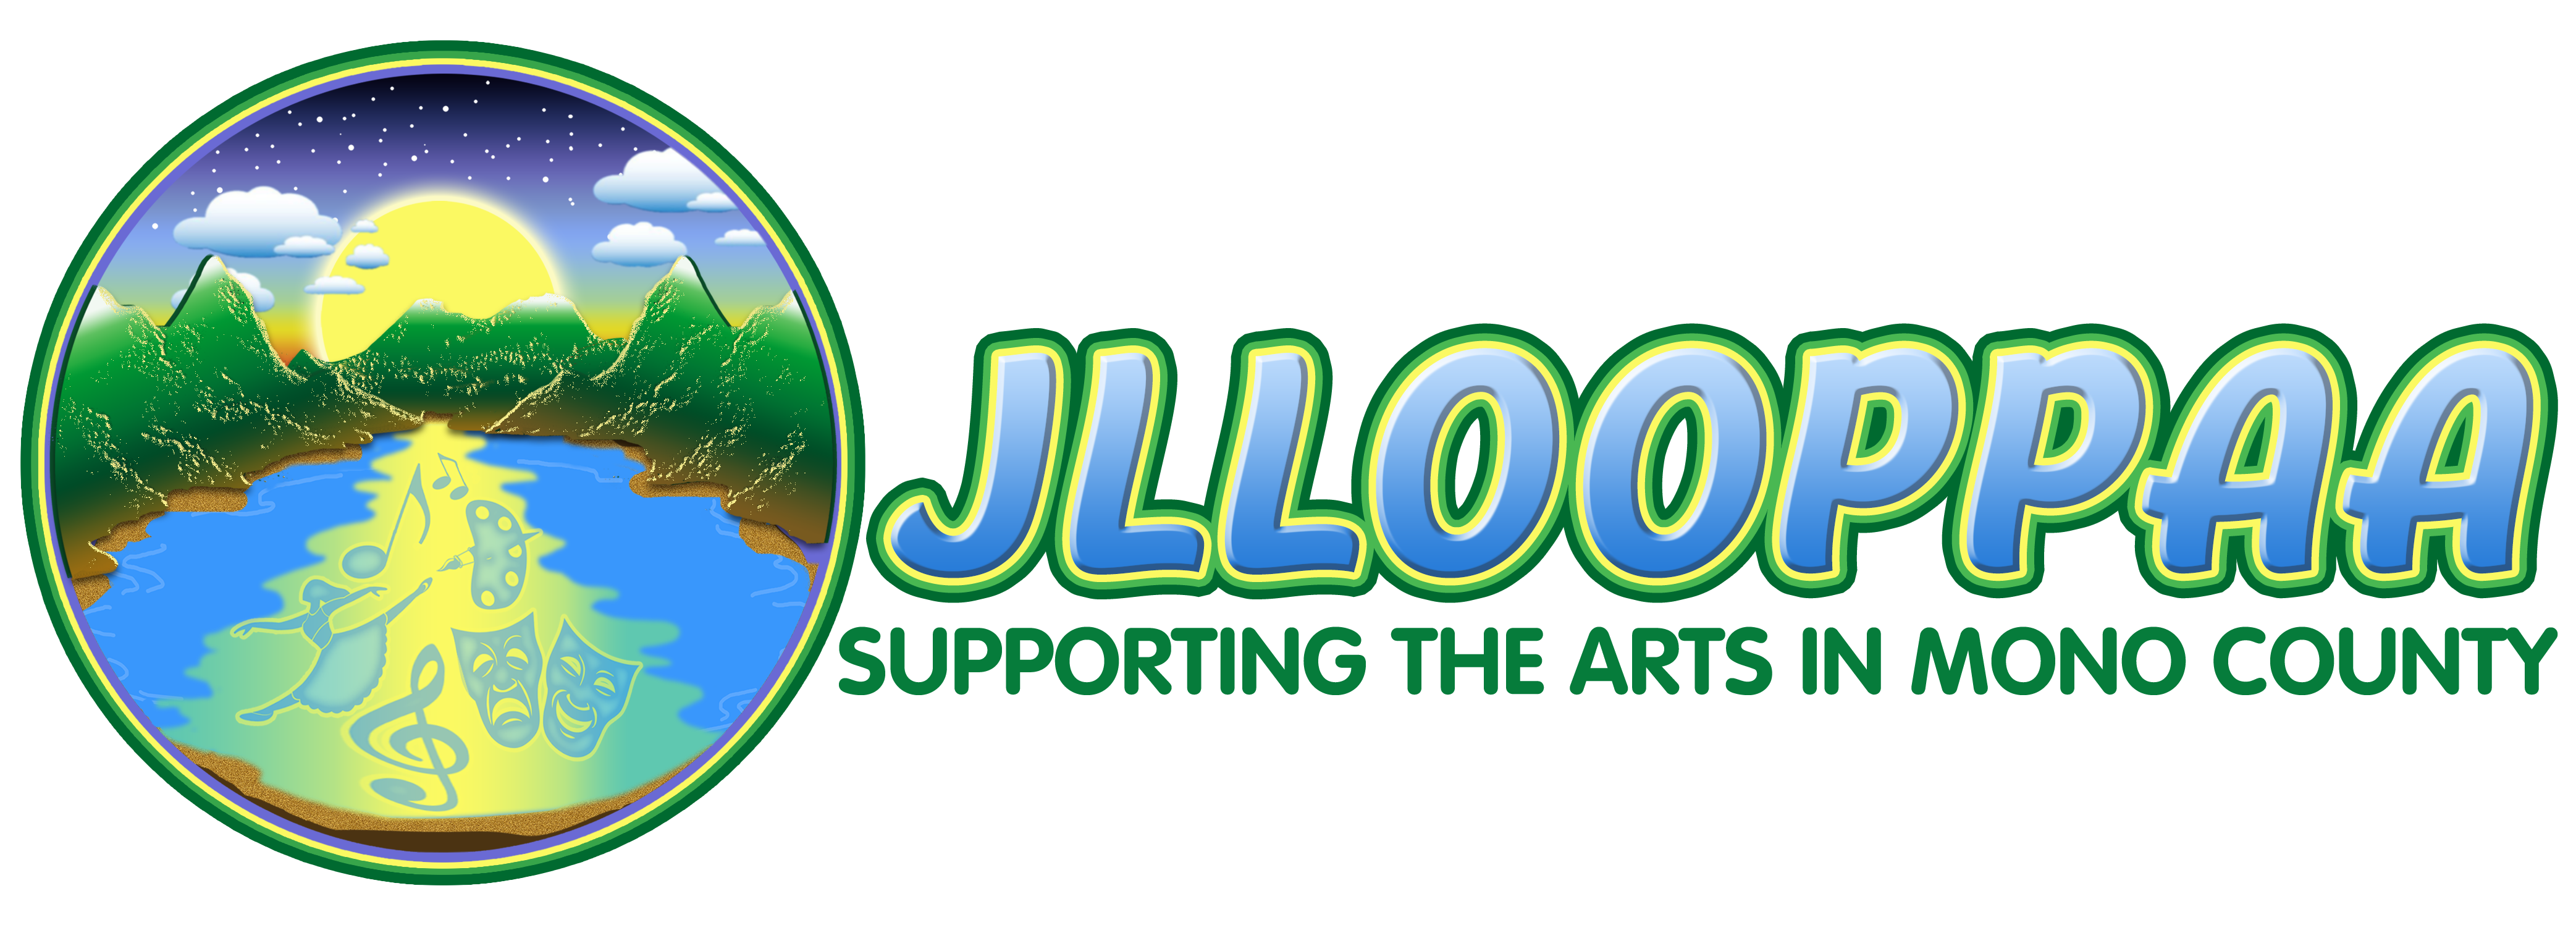 June Lake Loop Performing Arts Association Announces Two School Assembly Concerts in Mono County on Jam Fest Weekend